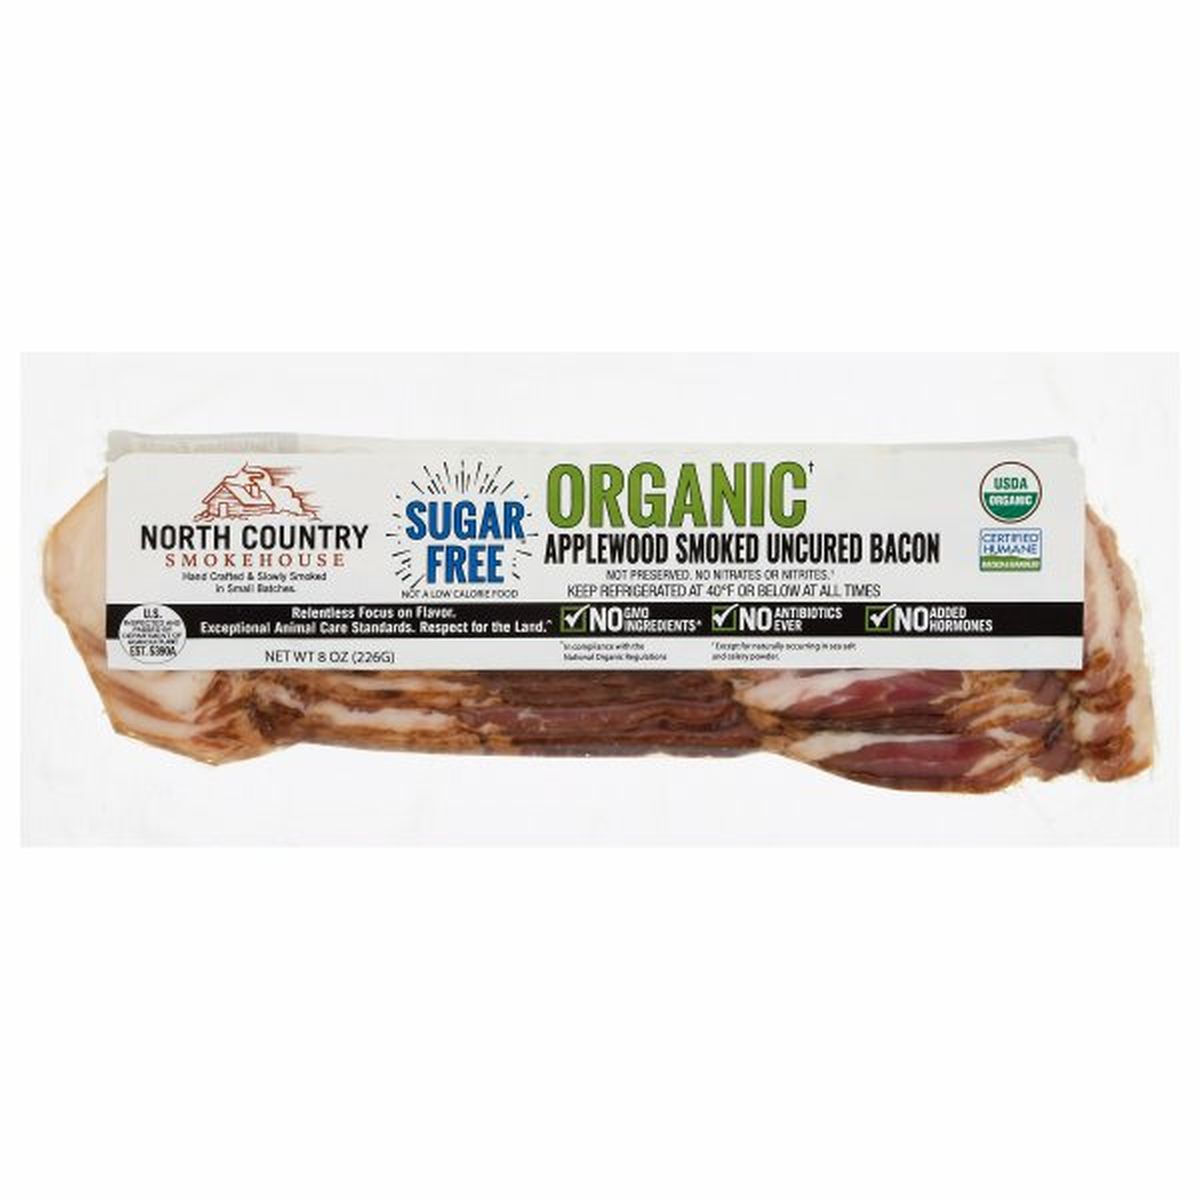 Calories in North Country Smokehouse Bacon, Sugar Free, Organic, Applewood Smoked, Uncured